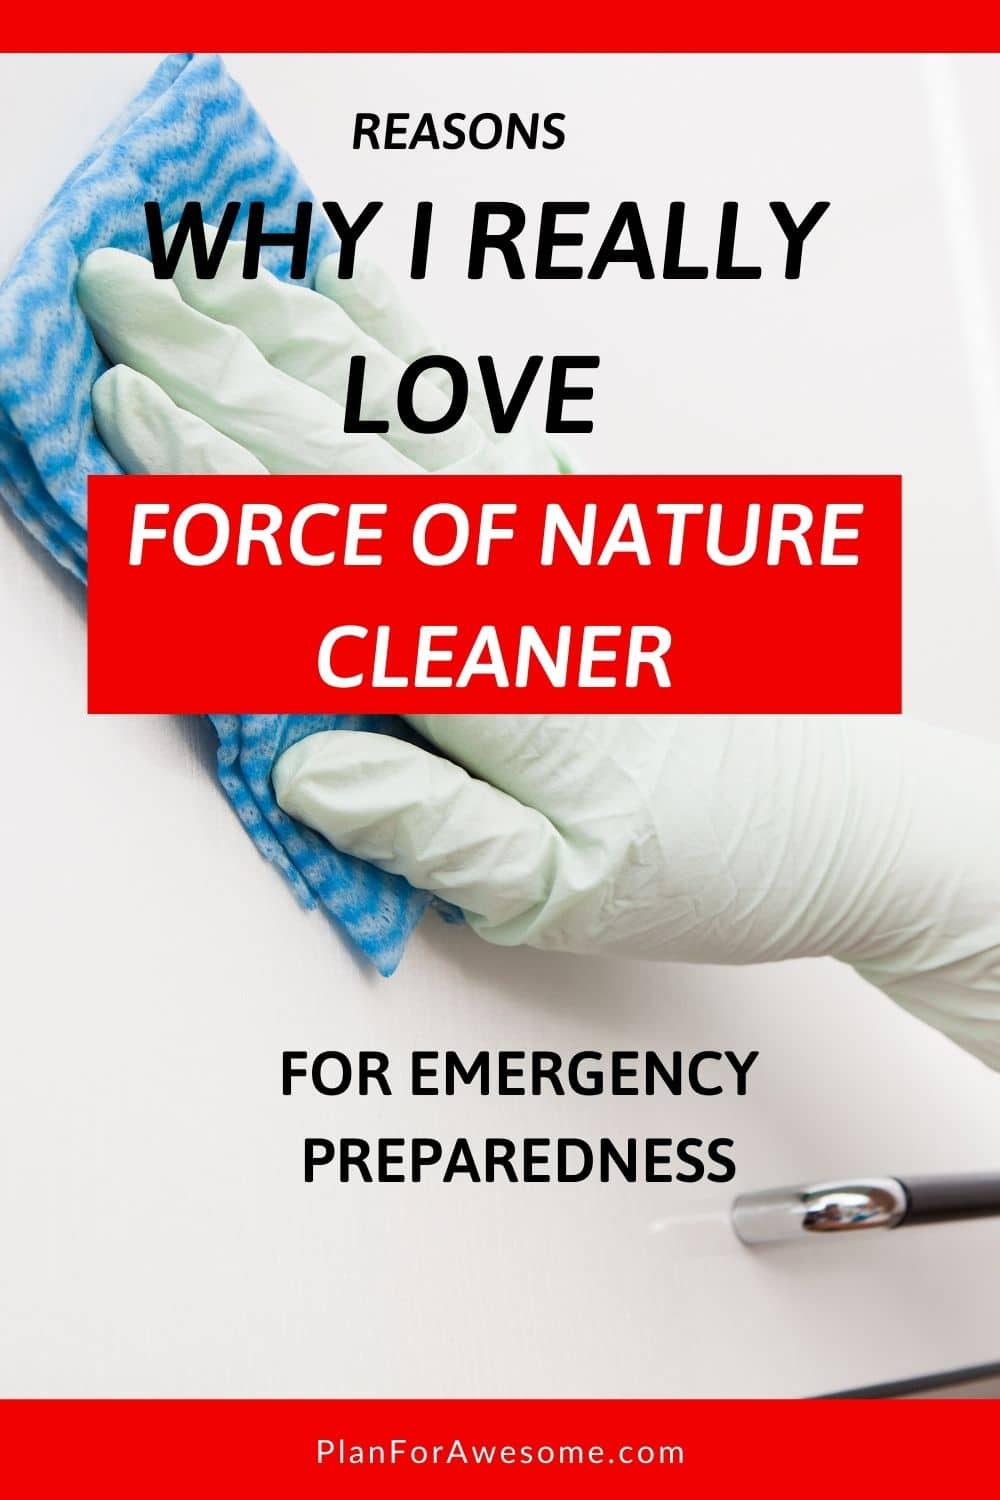 Force of Nature: Effective AND Easy To Store